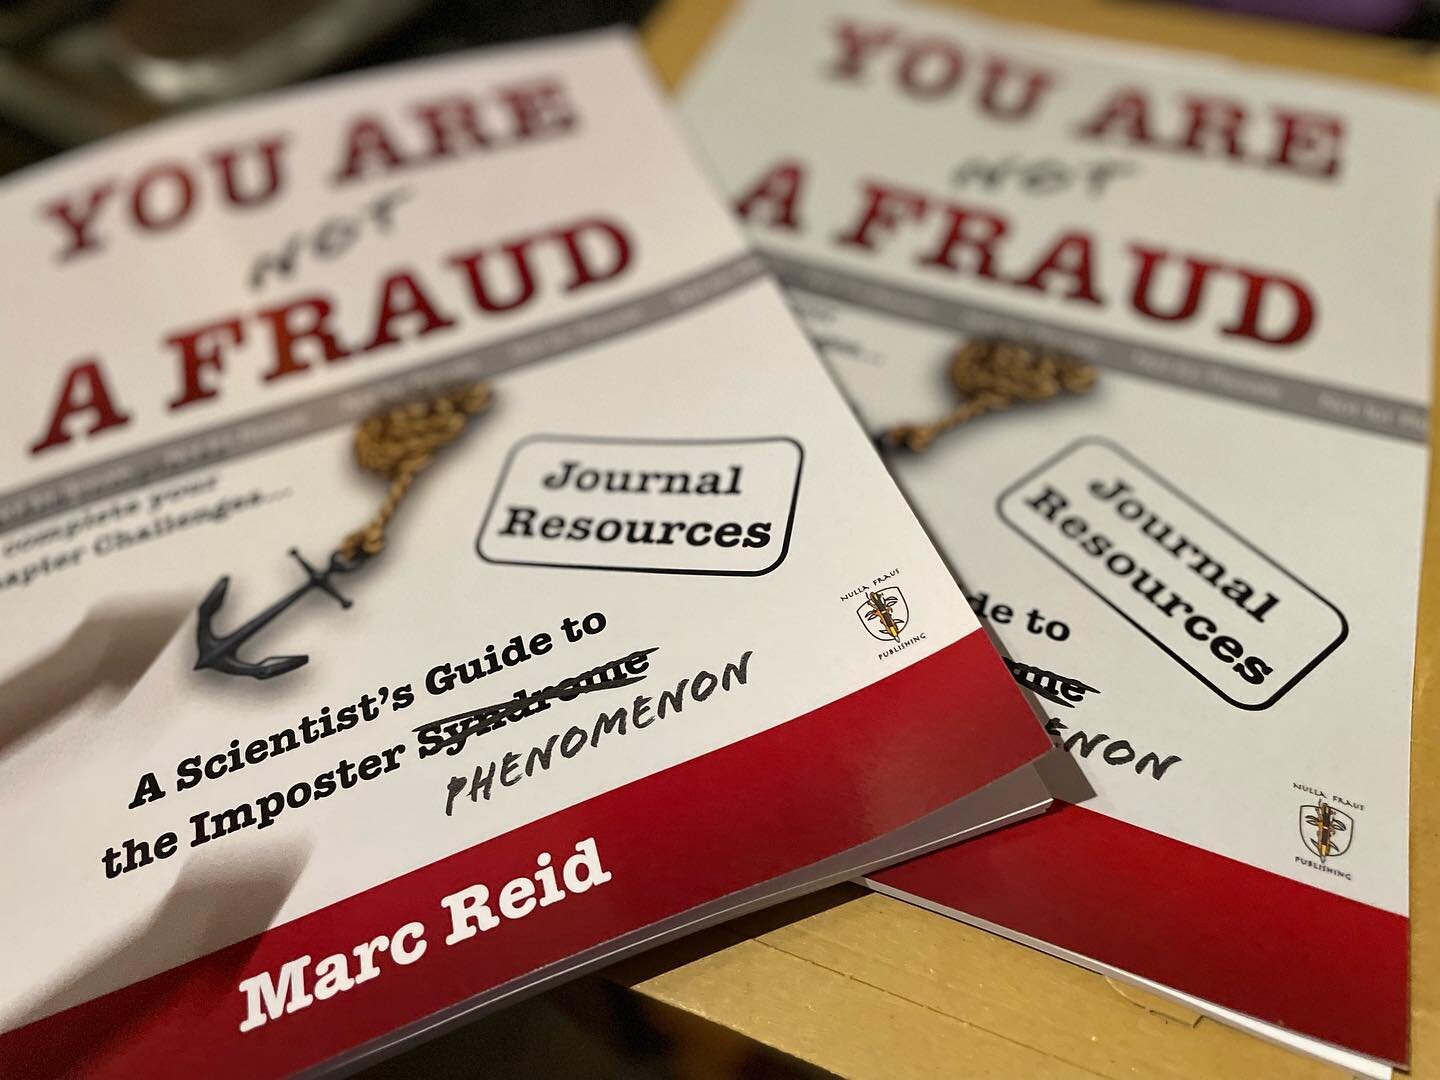 The #YouAreNotAFraud Journal Resource accompaniment is here!

The proofs look good, meaning the journal will be available for publication hot on the heals of the main book.

More details coming soon.

#ImposterSyndrome #ImposterPhenomenon #book
#book